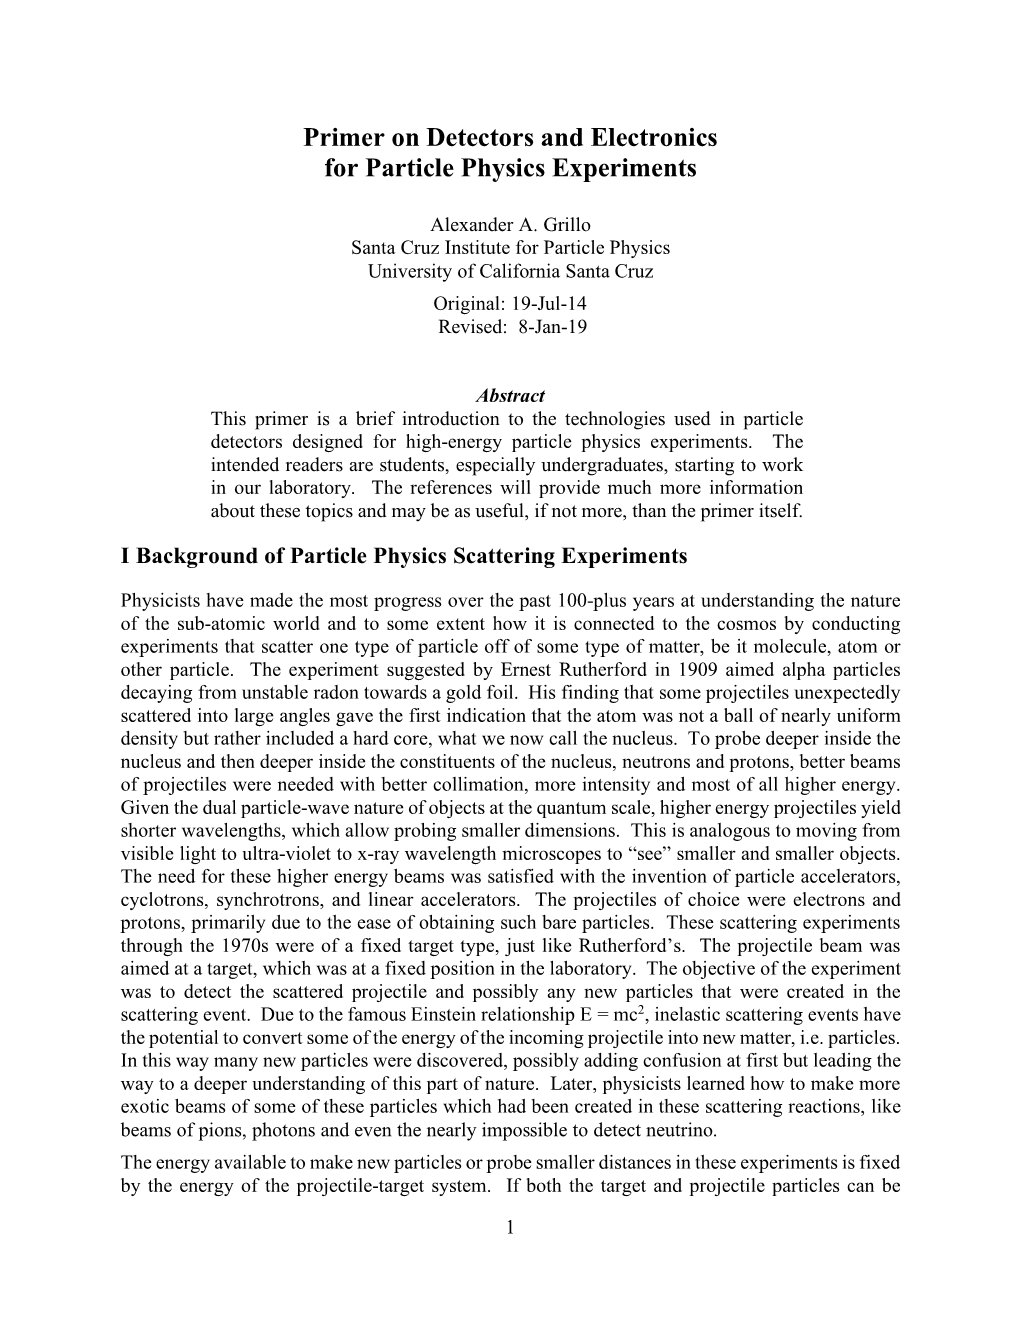 Primer on Detectors and Electronics for Particle Physics Experiments